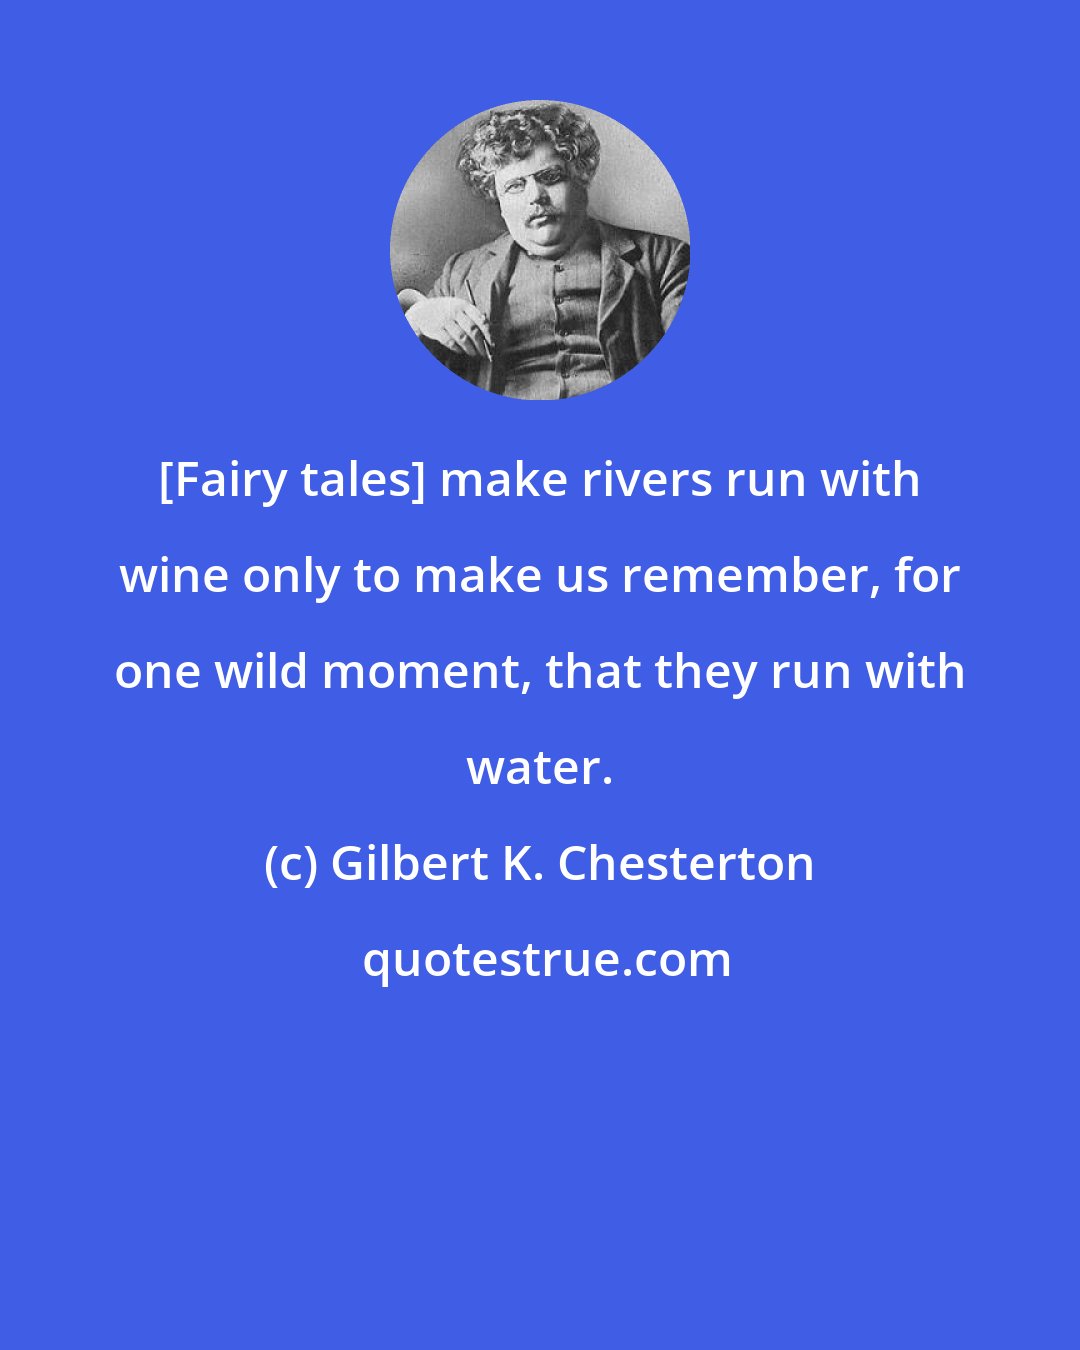 Gilbert K. Chesterton: [Fairy tales] make rivers run with wine only to make us remember, for one wild moment, that they run with water.